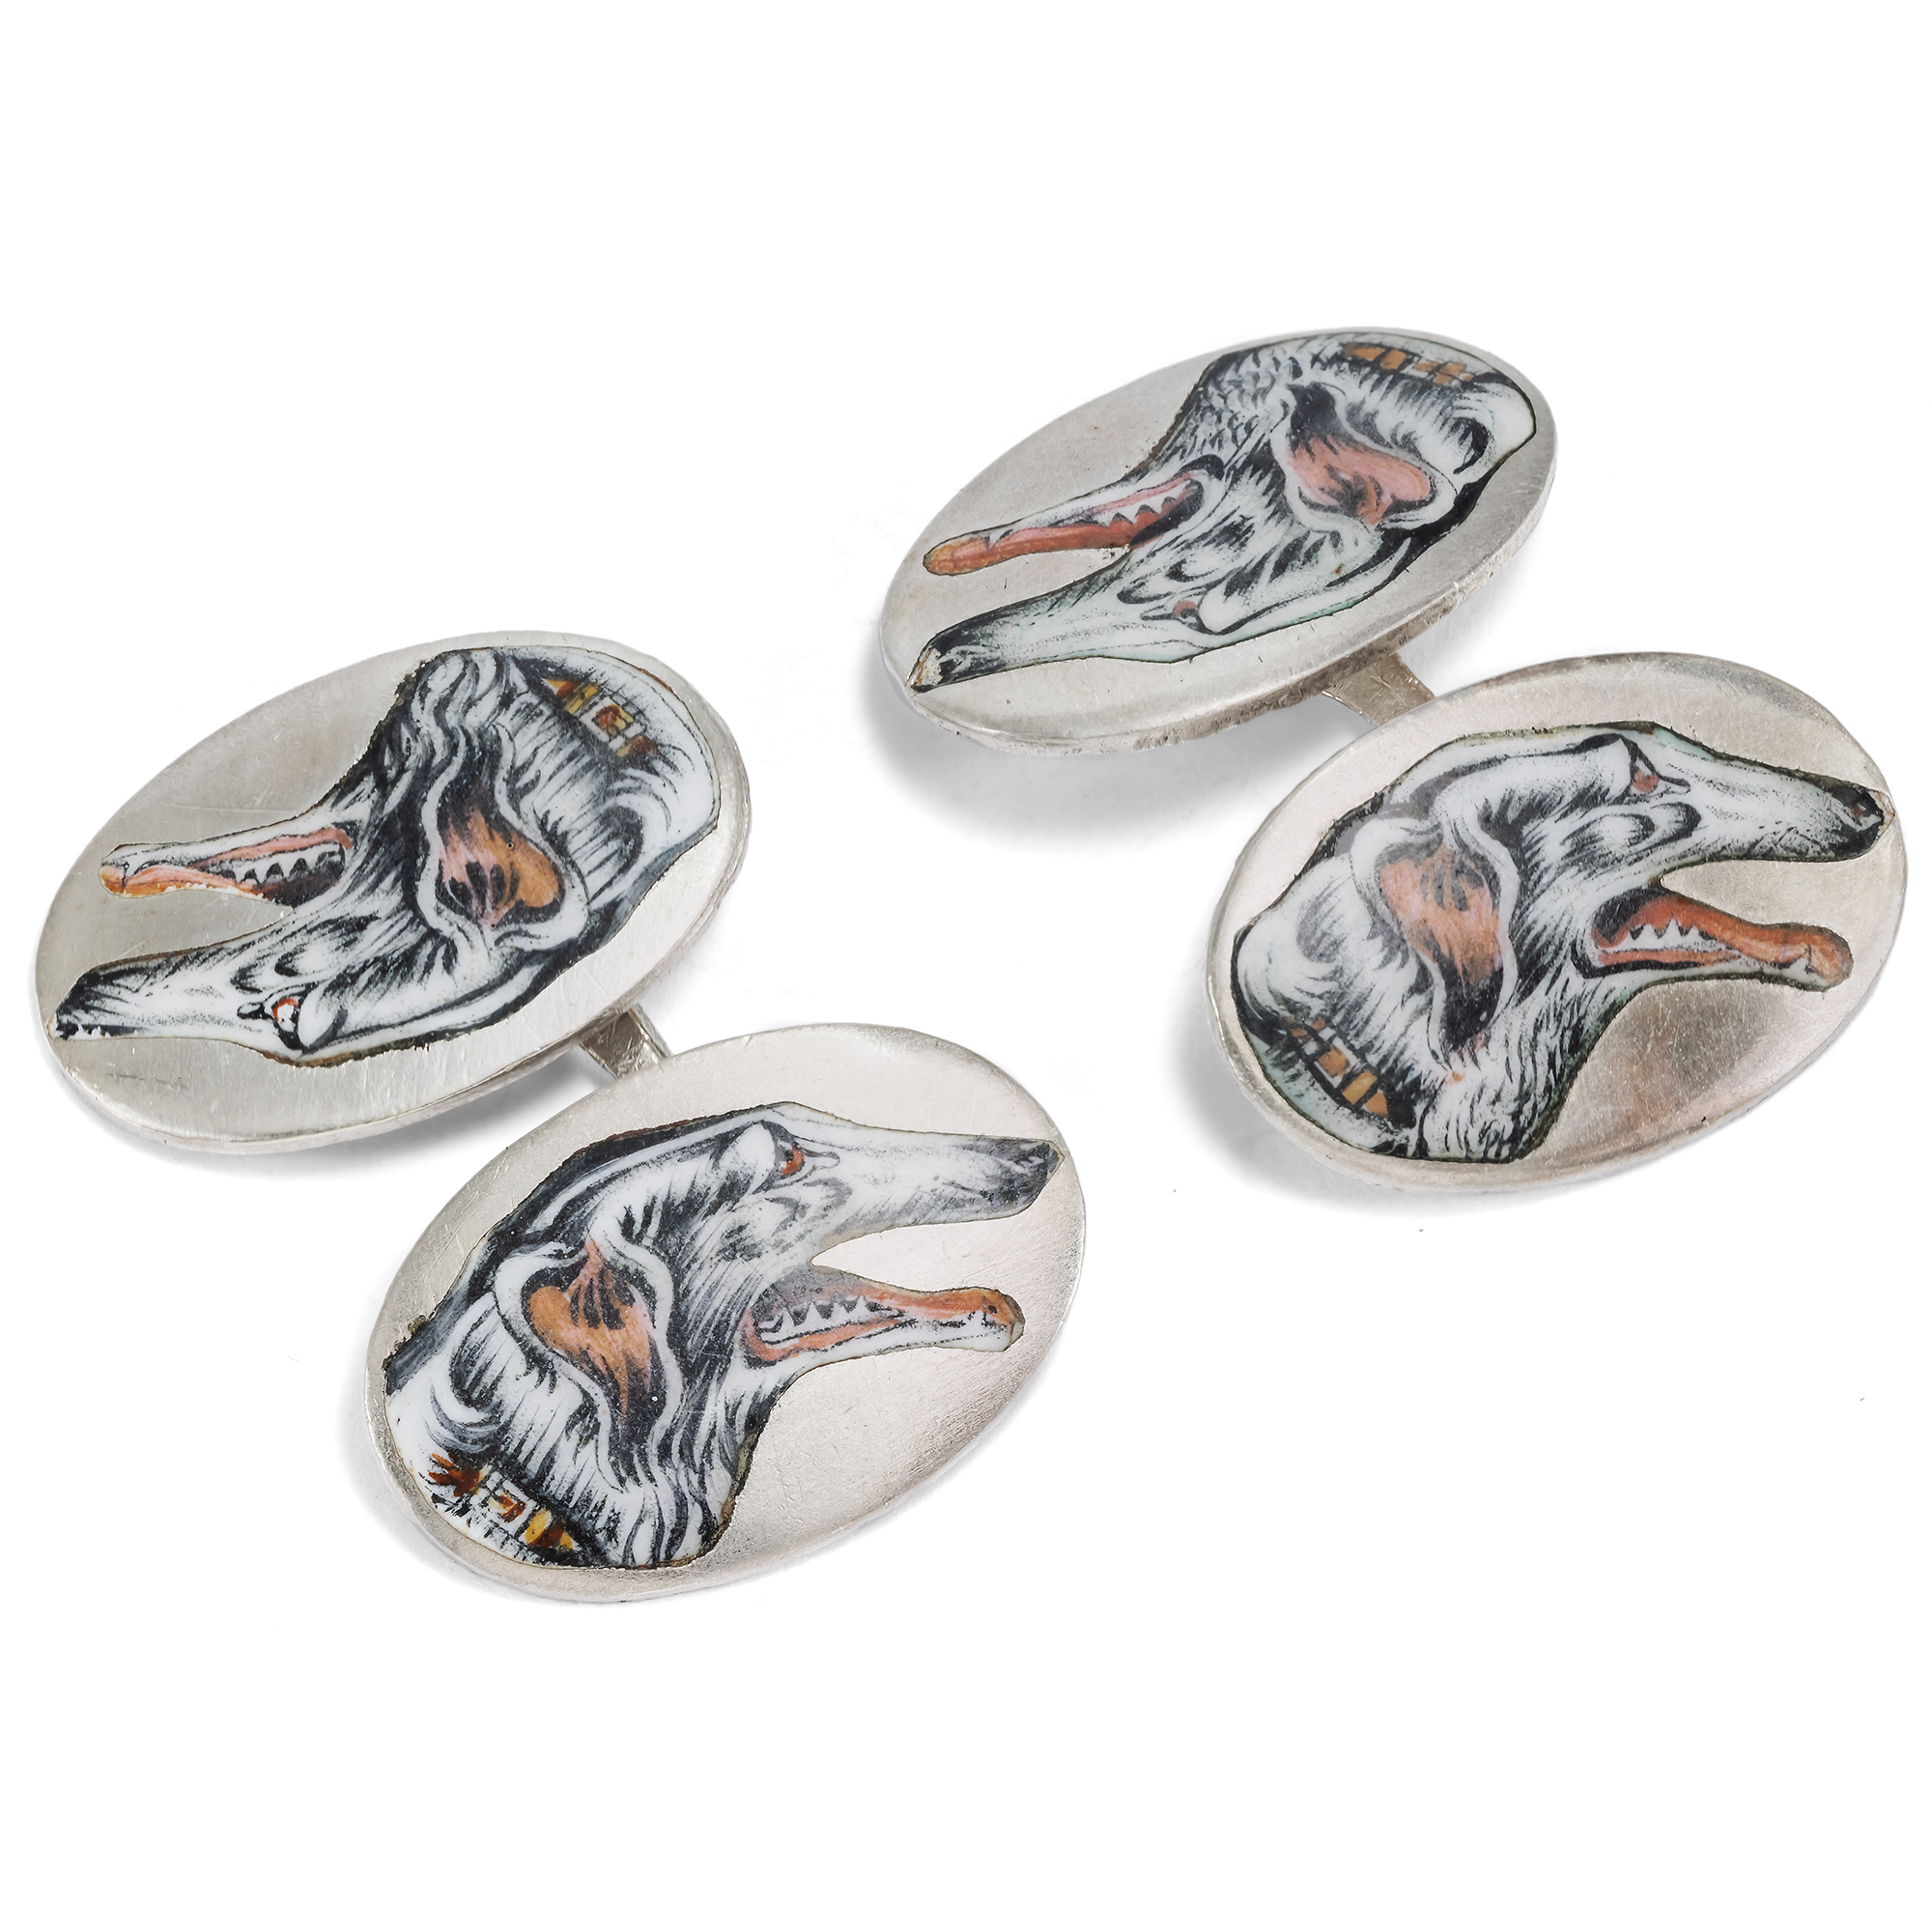 Victorian Novelty Cufflinks with Enameled Borzoi Dogs, c. 1900